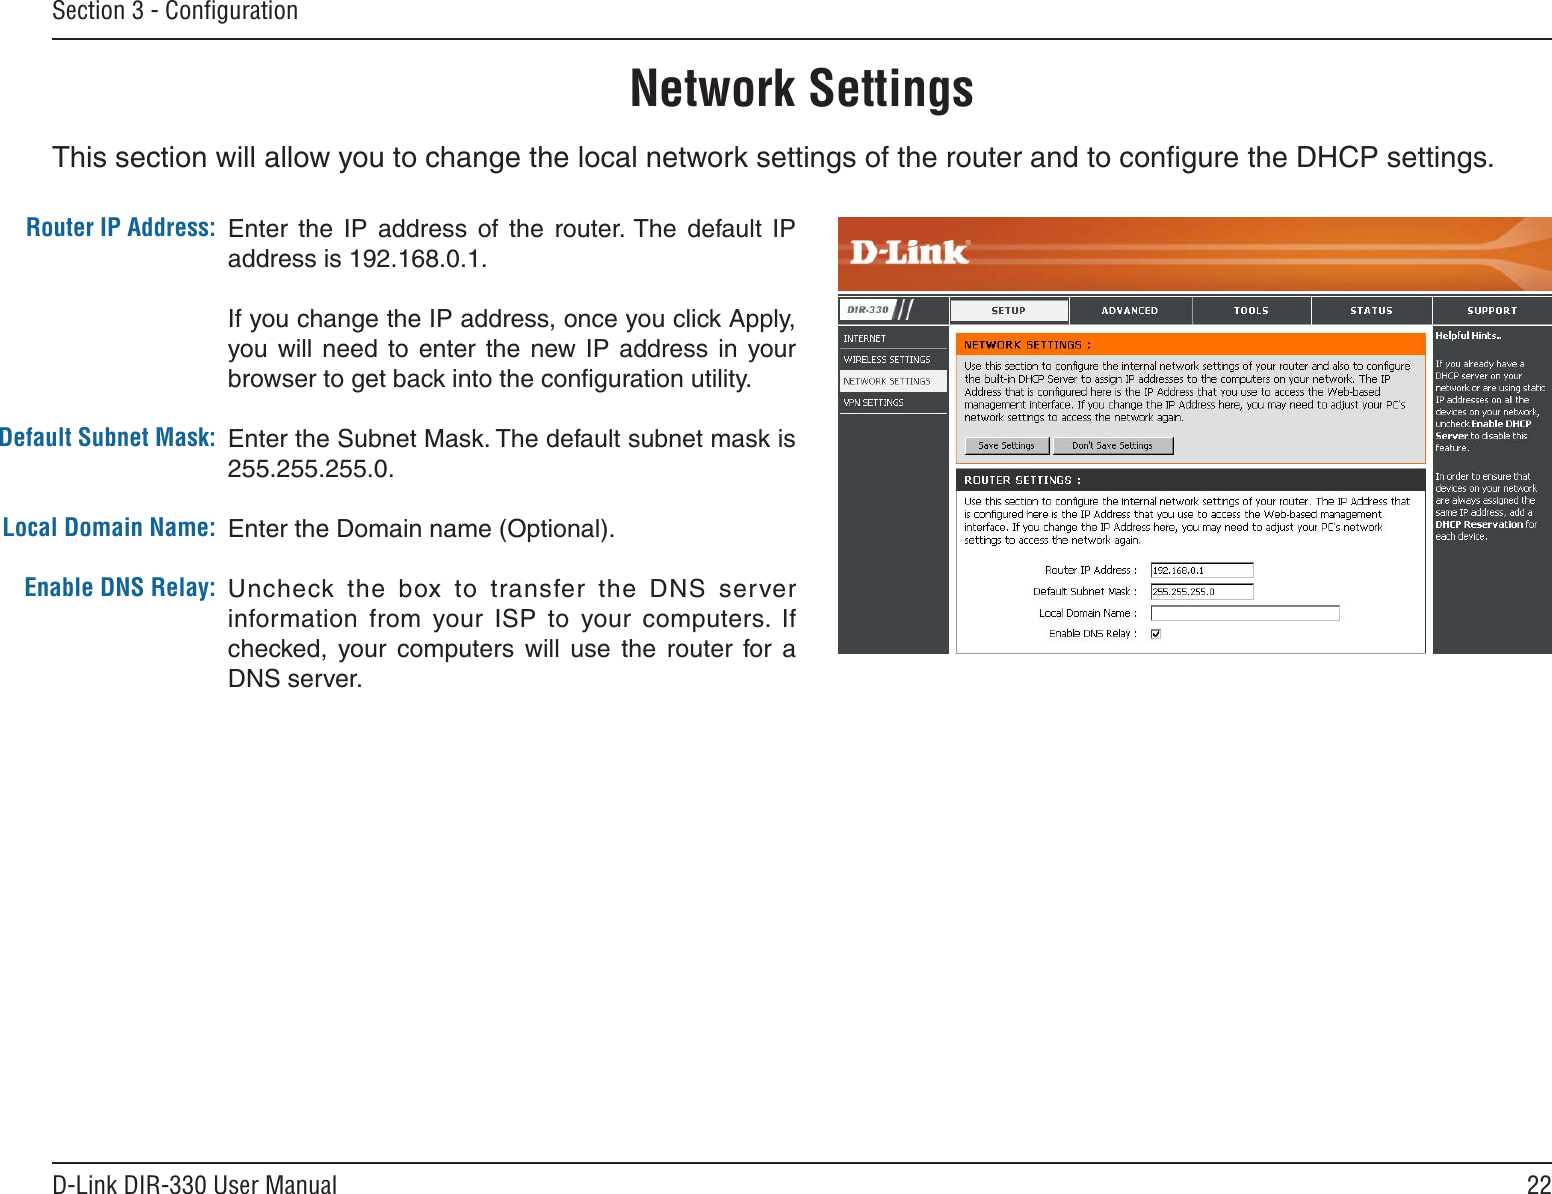 22D-Link DIR-330 User ManualSection 3 - ConﬁgurationThis section will allow you to change the local network settings of the router and to conﬁgure the DHCP settings.Network SettingsEnter  the  IP  address  of  the  router. The  default  IP address is 192.168.0.1.If you change the IP address, once you click Apply, you will  need to  enter  the new IP  address  in your browser to get back into the conﬁguration utility.Enter the Subnet Mask. The default subnet mask is 255.255.255.0.Enter the Domain name (Optional).Uncheck the  box  to  transfer  the  DNS  server information  from  your  ISP  to  your  computers.  If checked,  your  computers  will  use  the  router  for  a DNS server.Router IP Address:Default Subnet Mask:Local Domain Name:Enable DNS Relay: